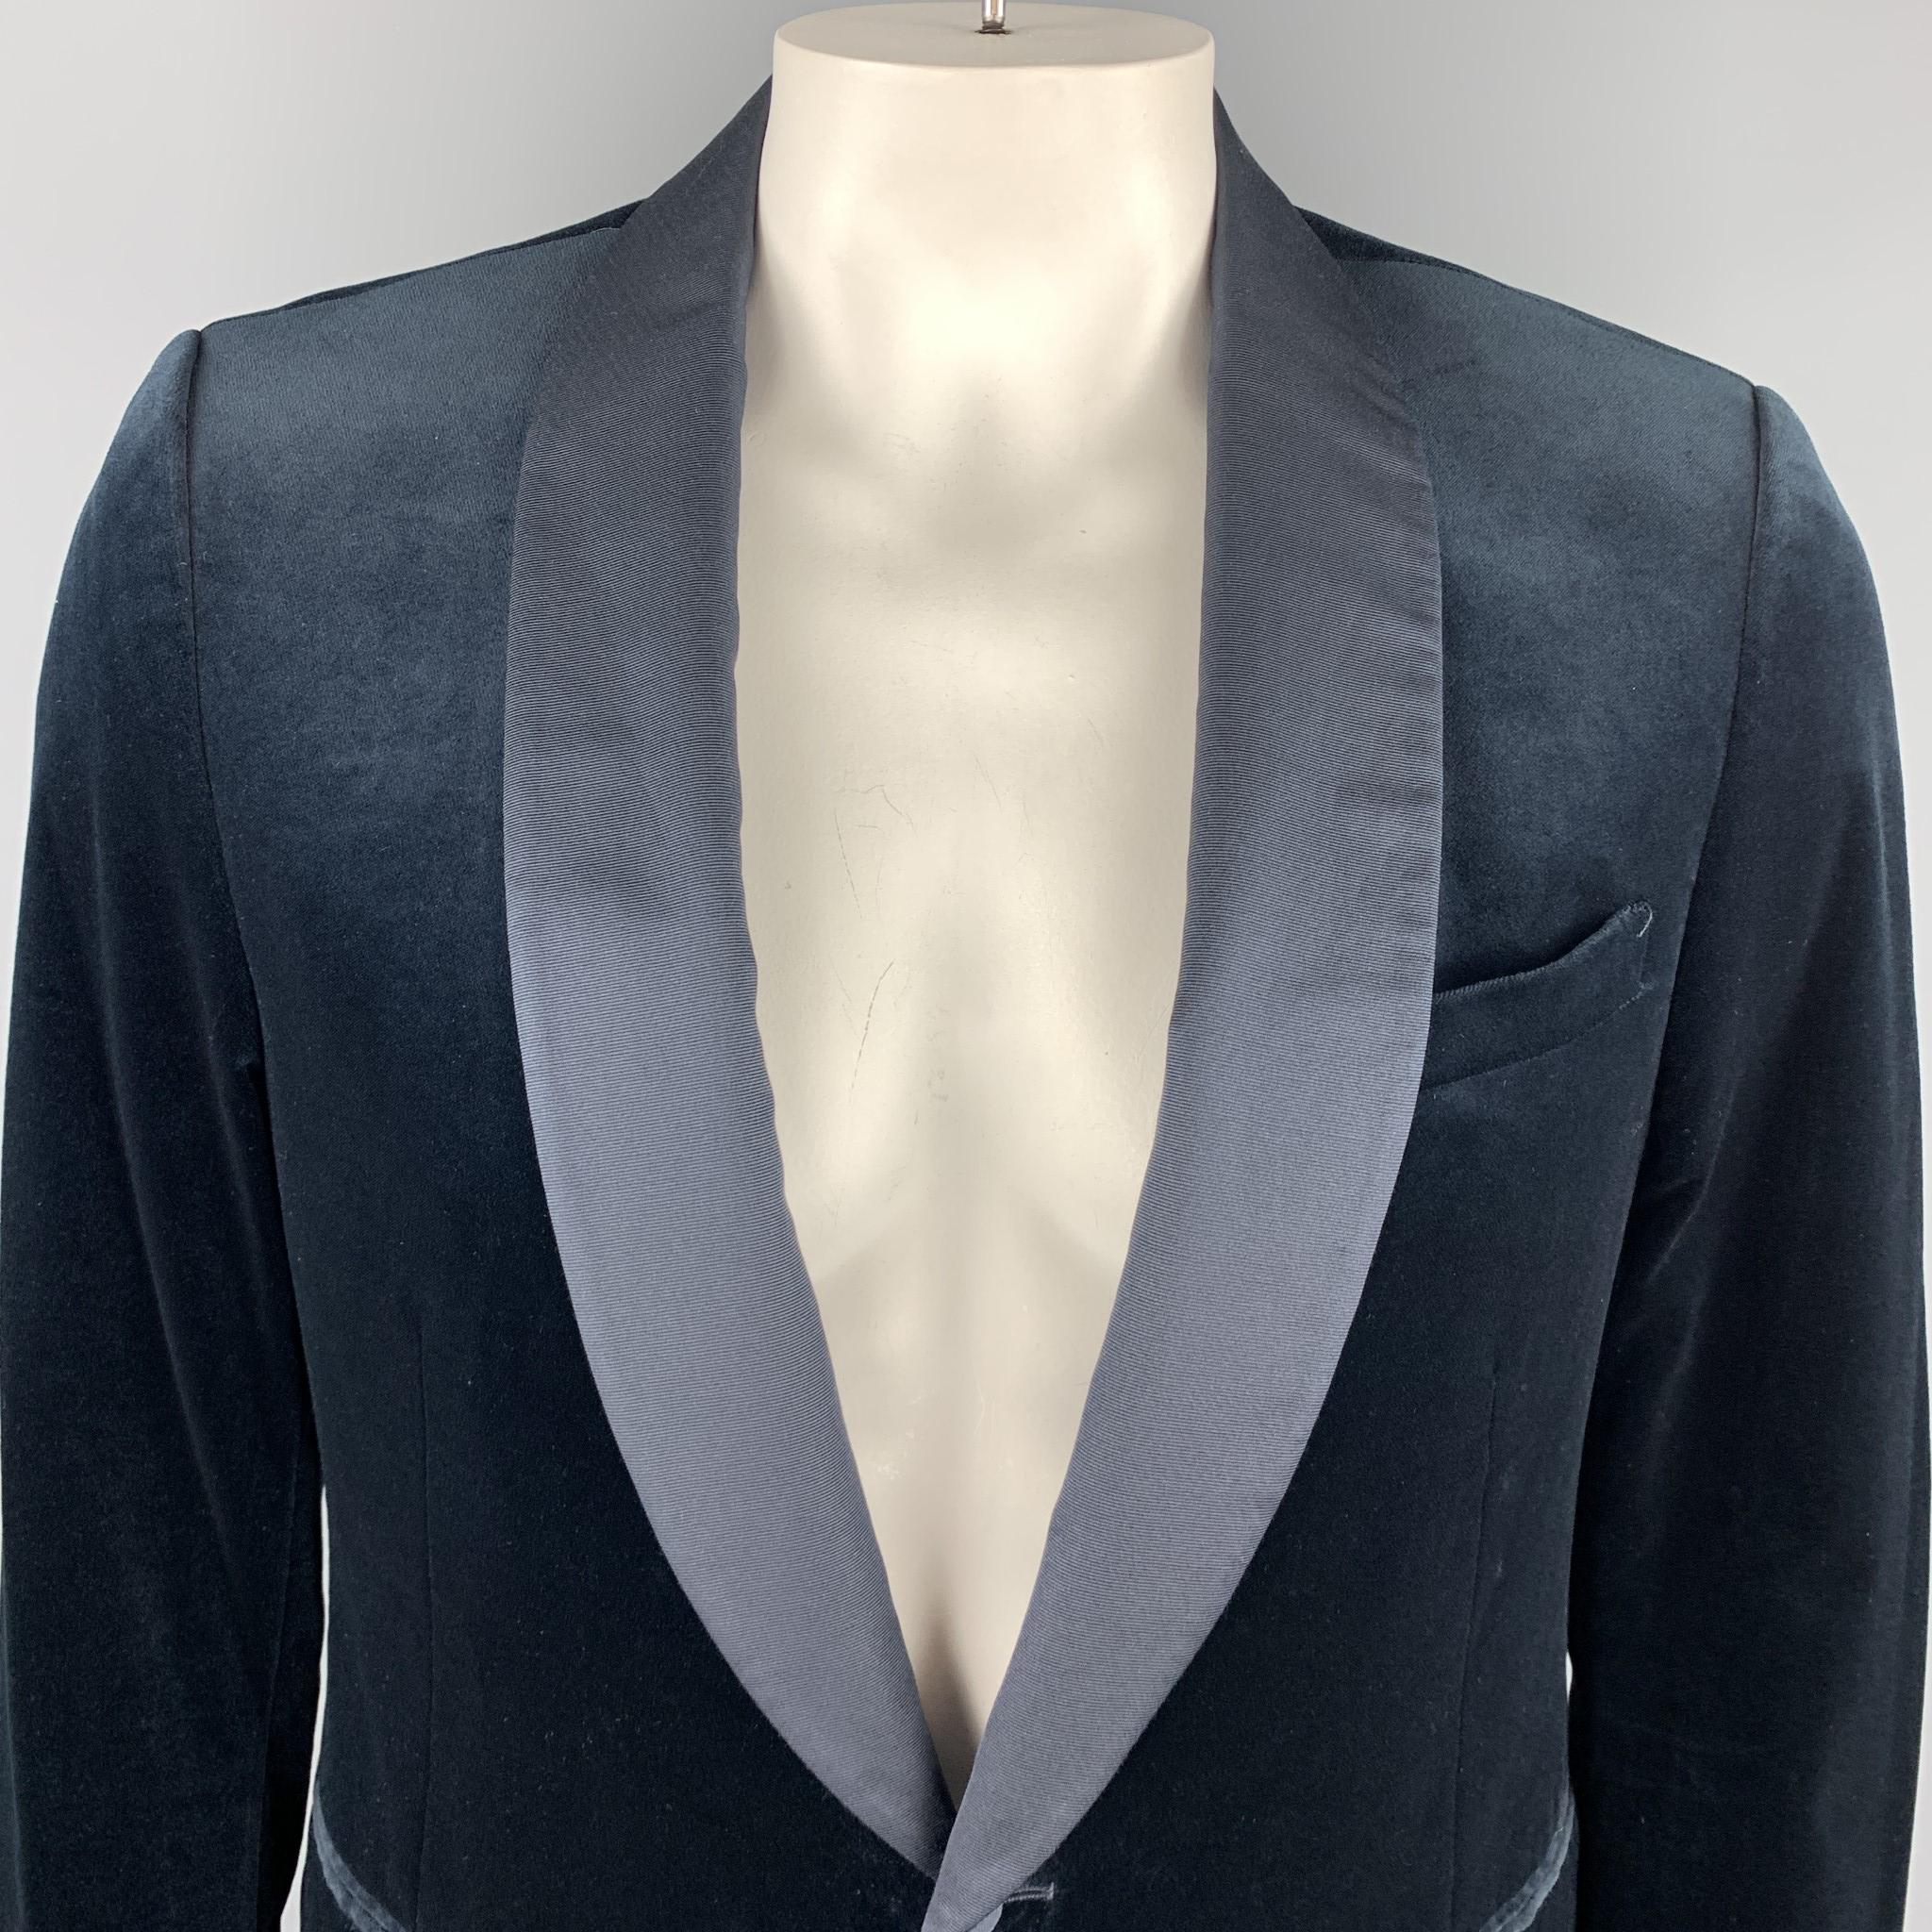 Z ZEGNA sport coat comes in black velvet with a faille shawl collar lapel, single breasted, one button front, and double vented back. 

Excellent Pre-Owned Condition.
Marked: IT 54 R

Measurements:

Shoulder: 17 in.
Chest: 44 in.
Sleeve: 25